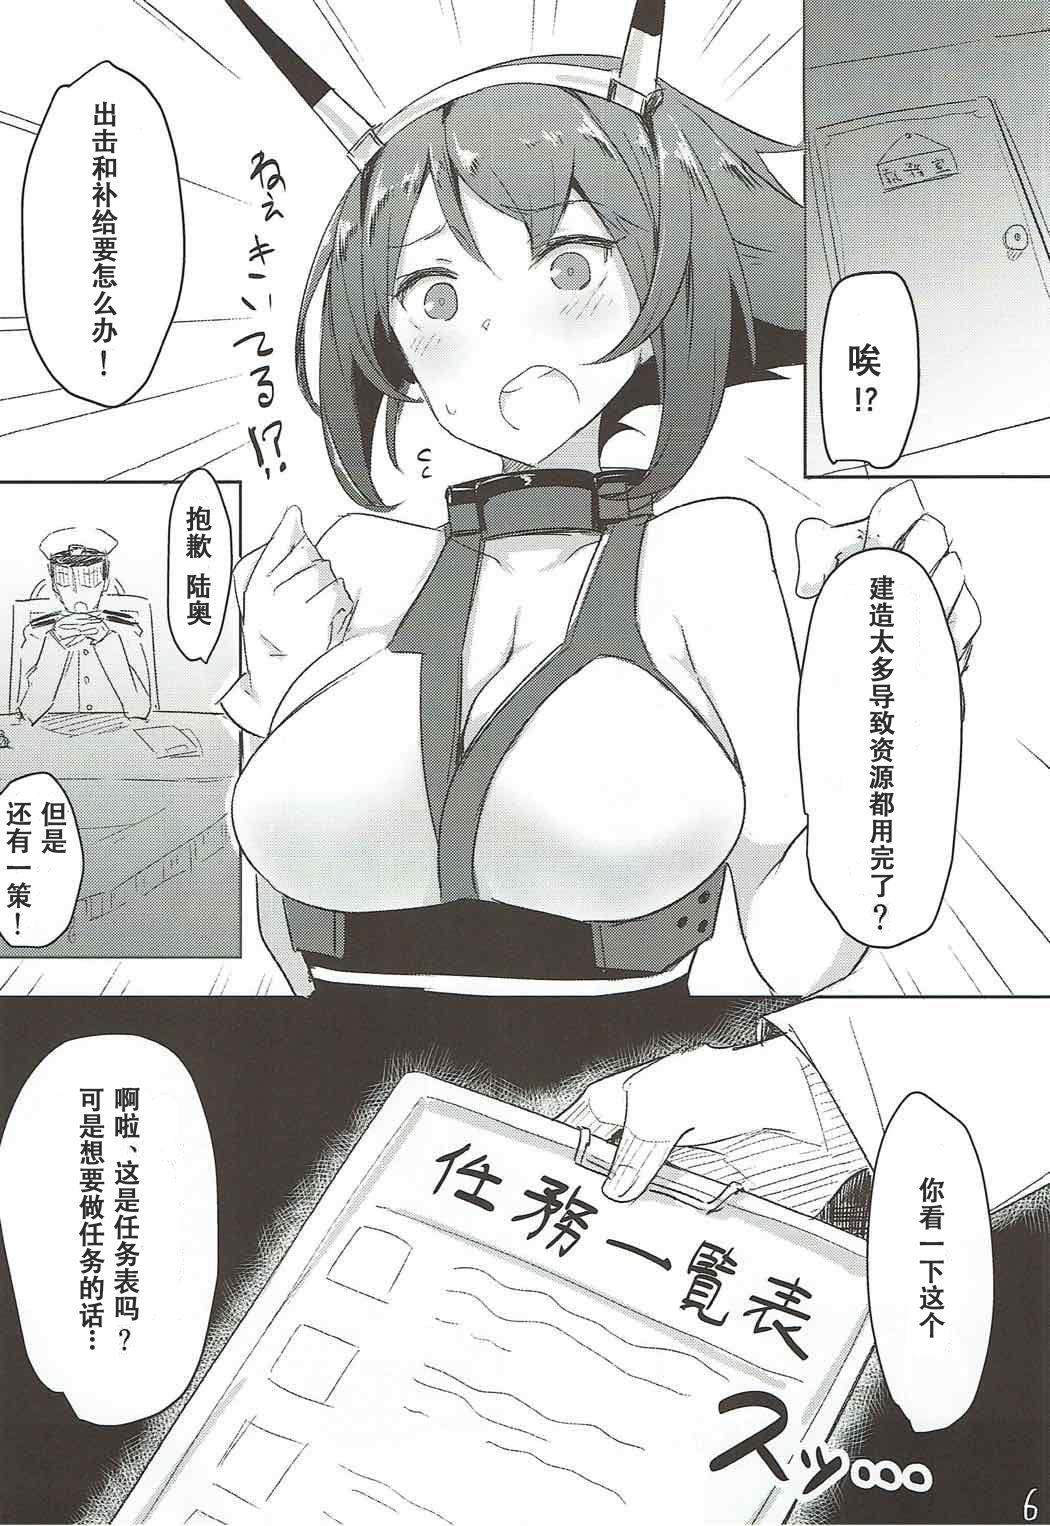 Behind Mucchiri - Kantai collection Livecam - Page 6